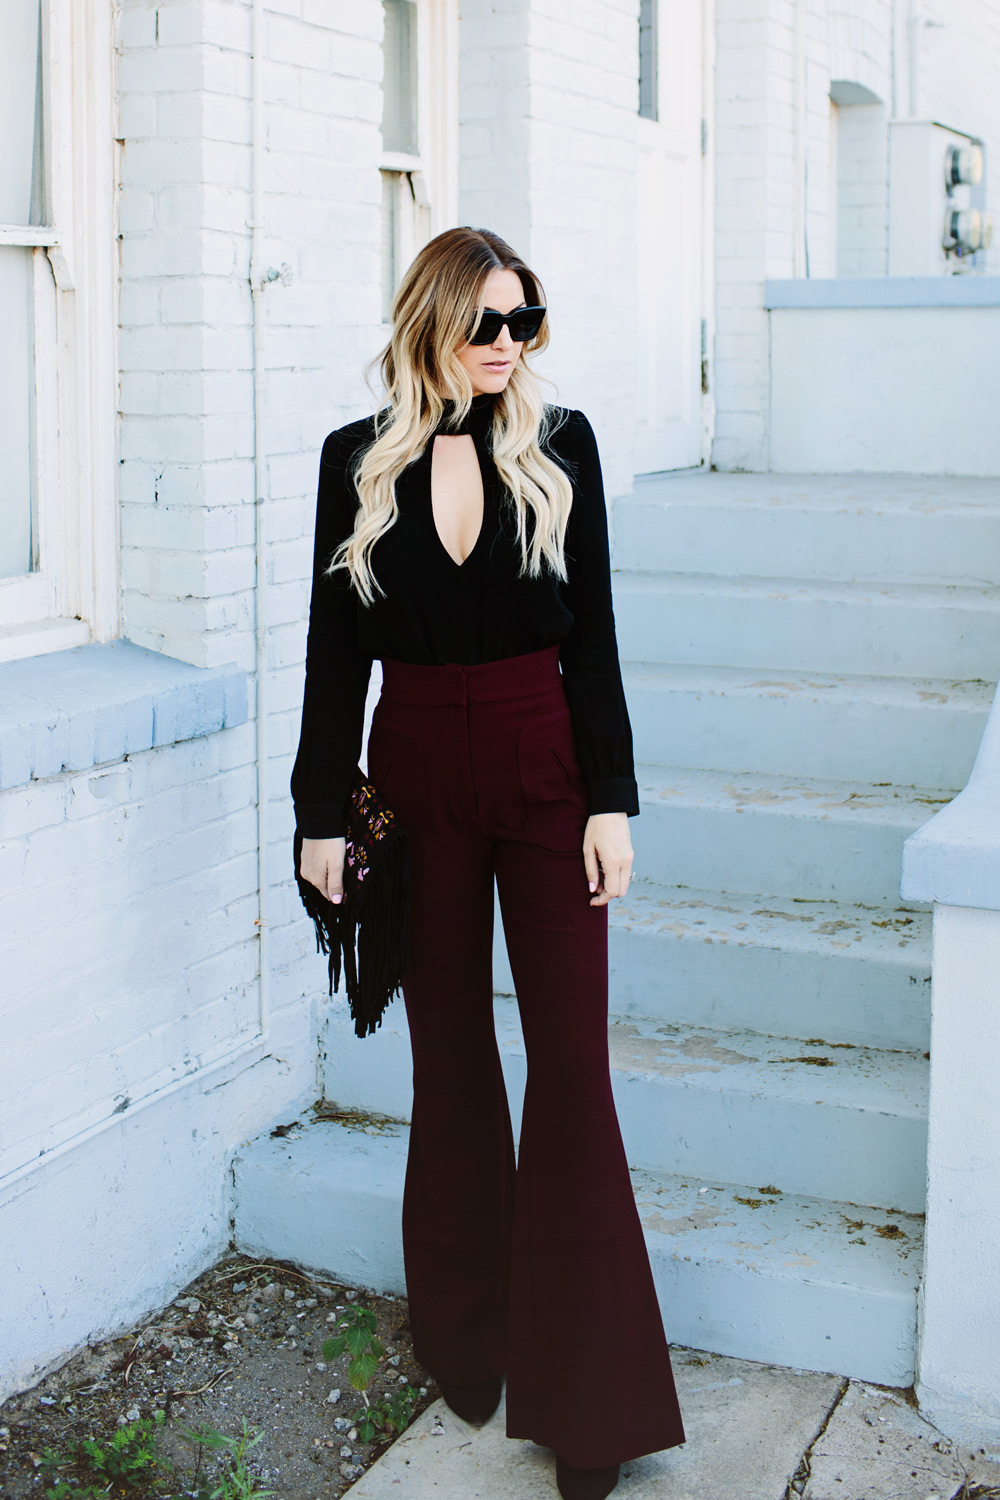 High Waisted Flared Pants - Dash of Darling